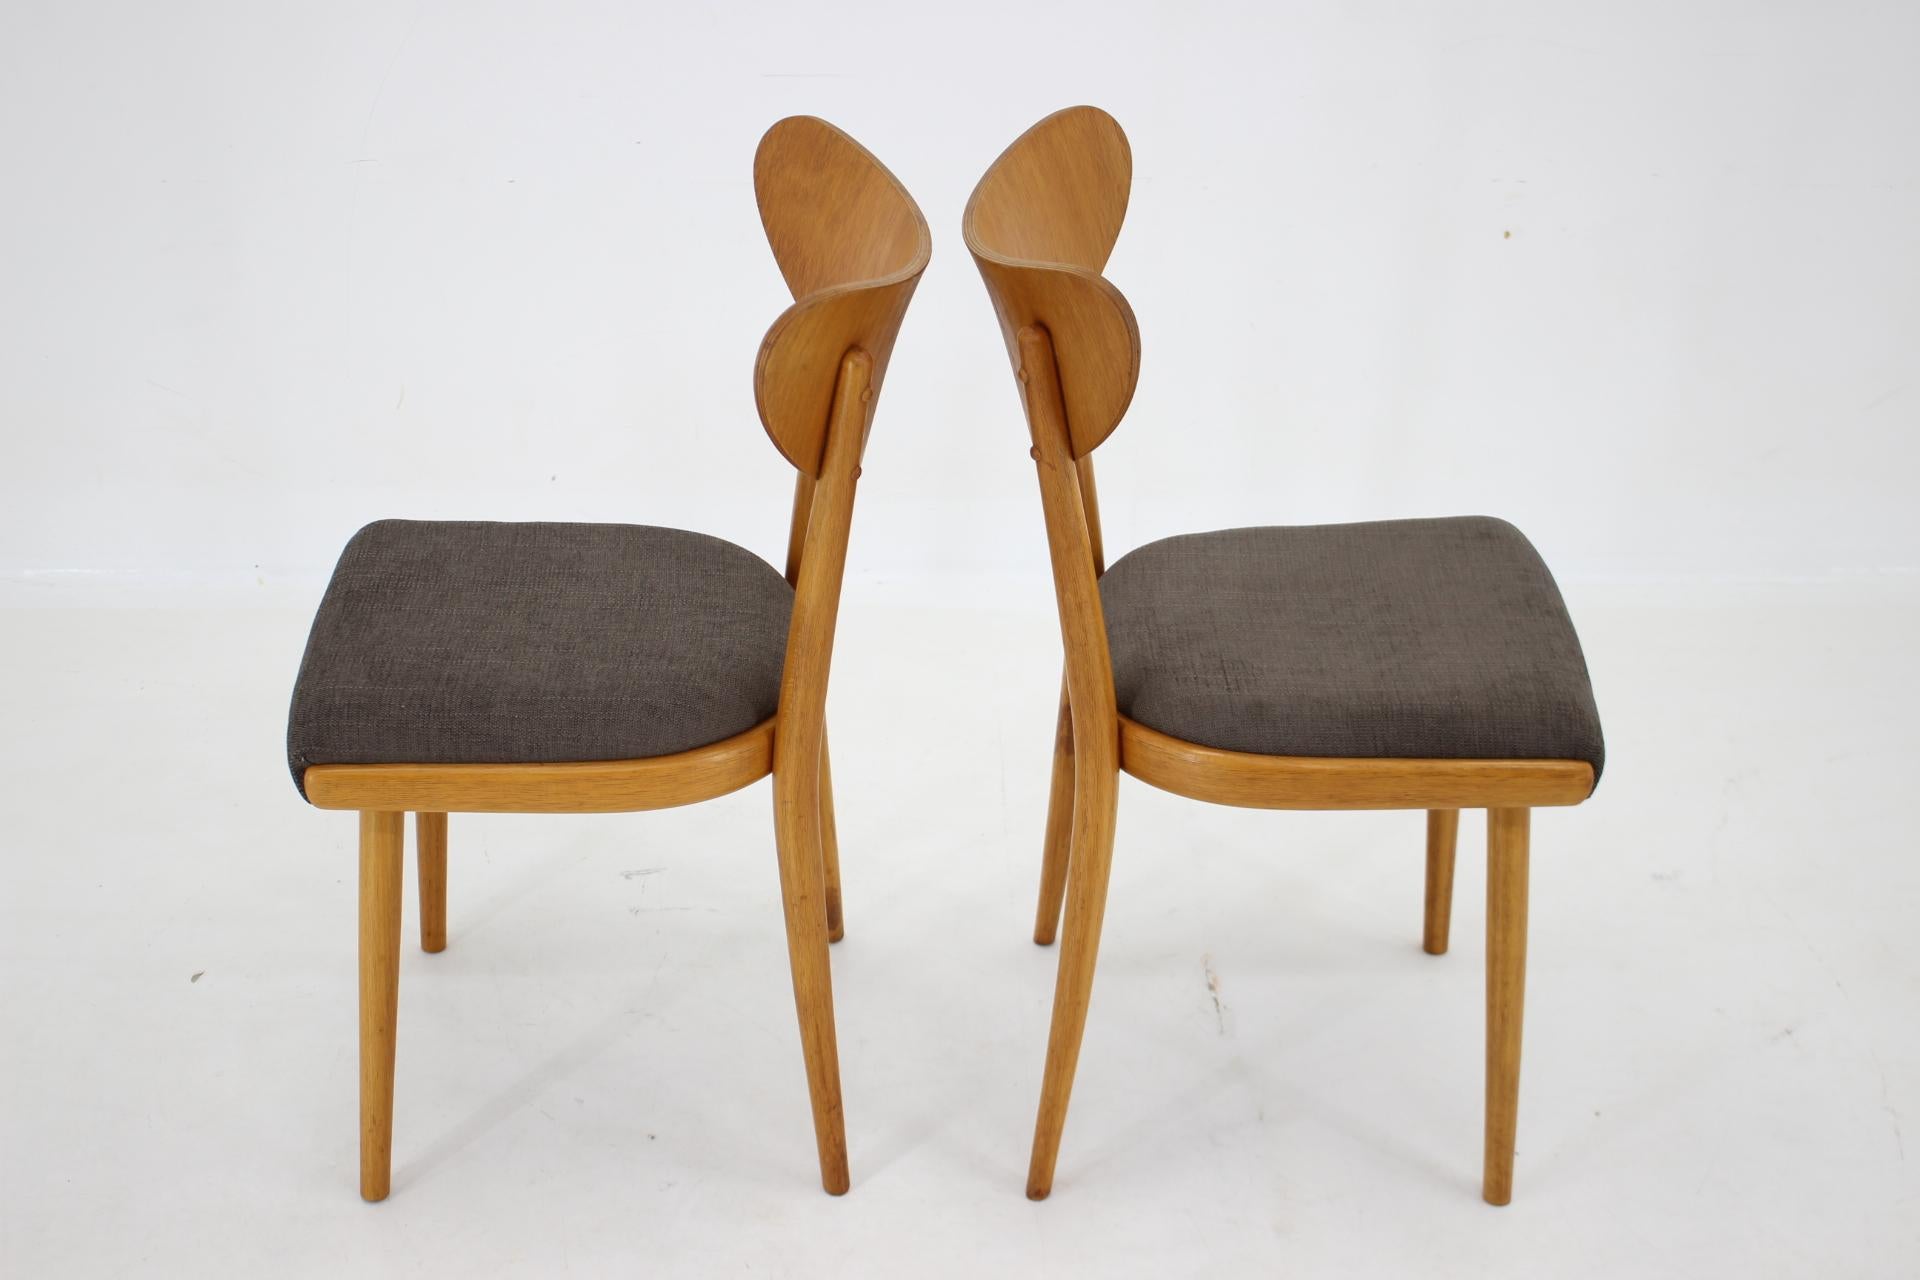 - Carefully refurbished
- Newly upholstered
- Made of Beech wood 